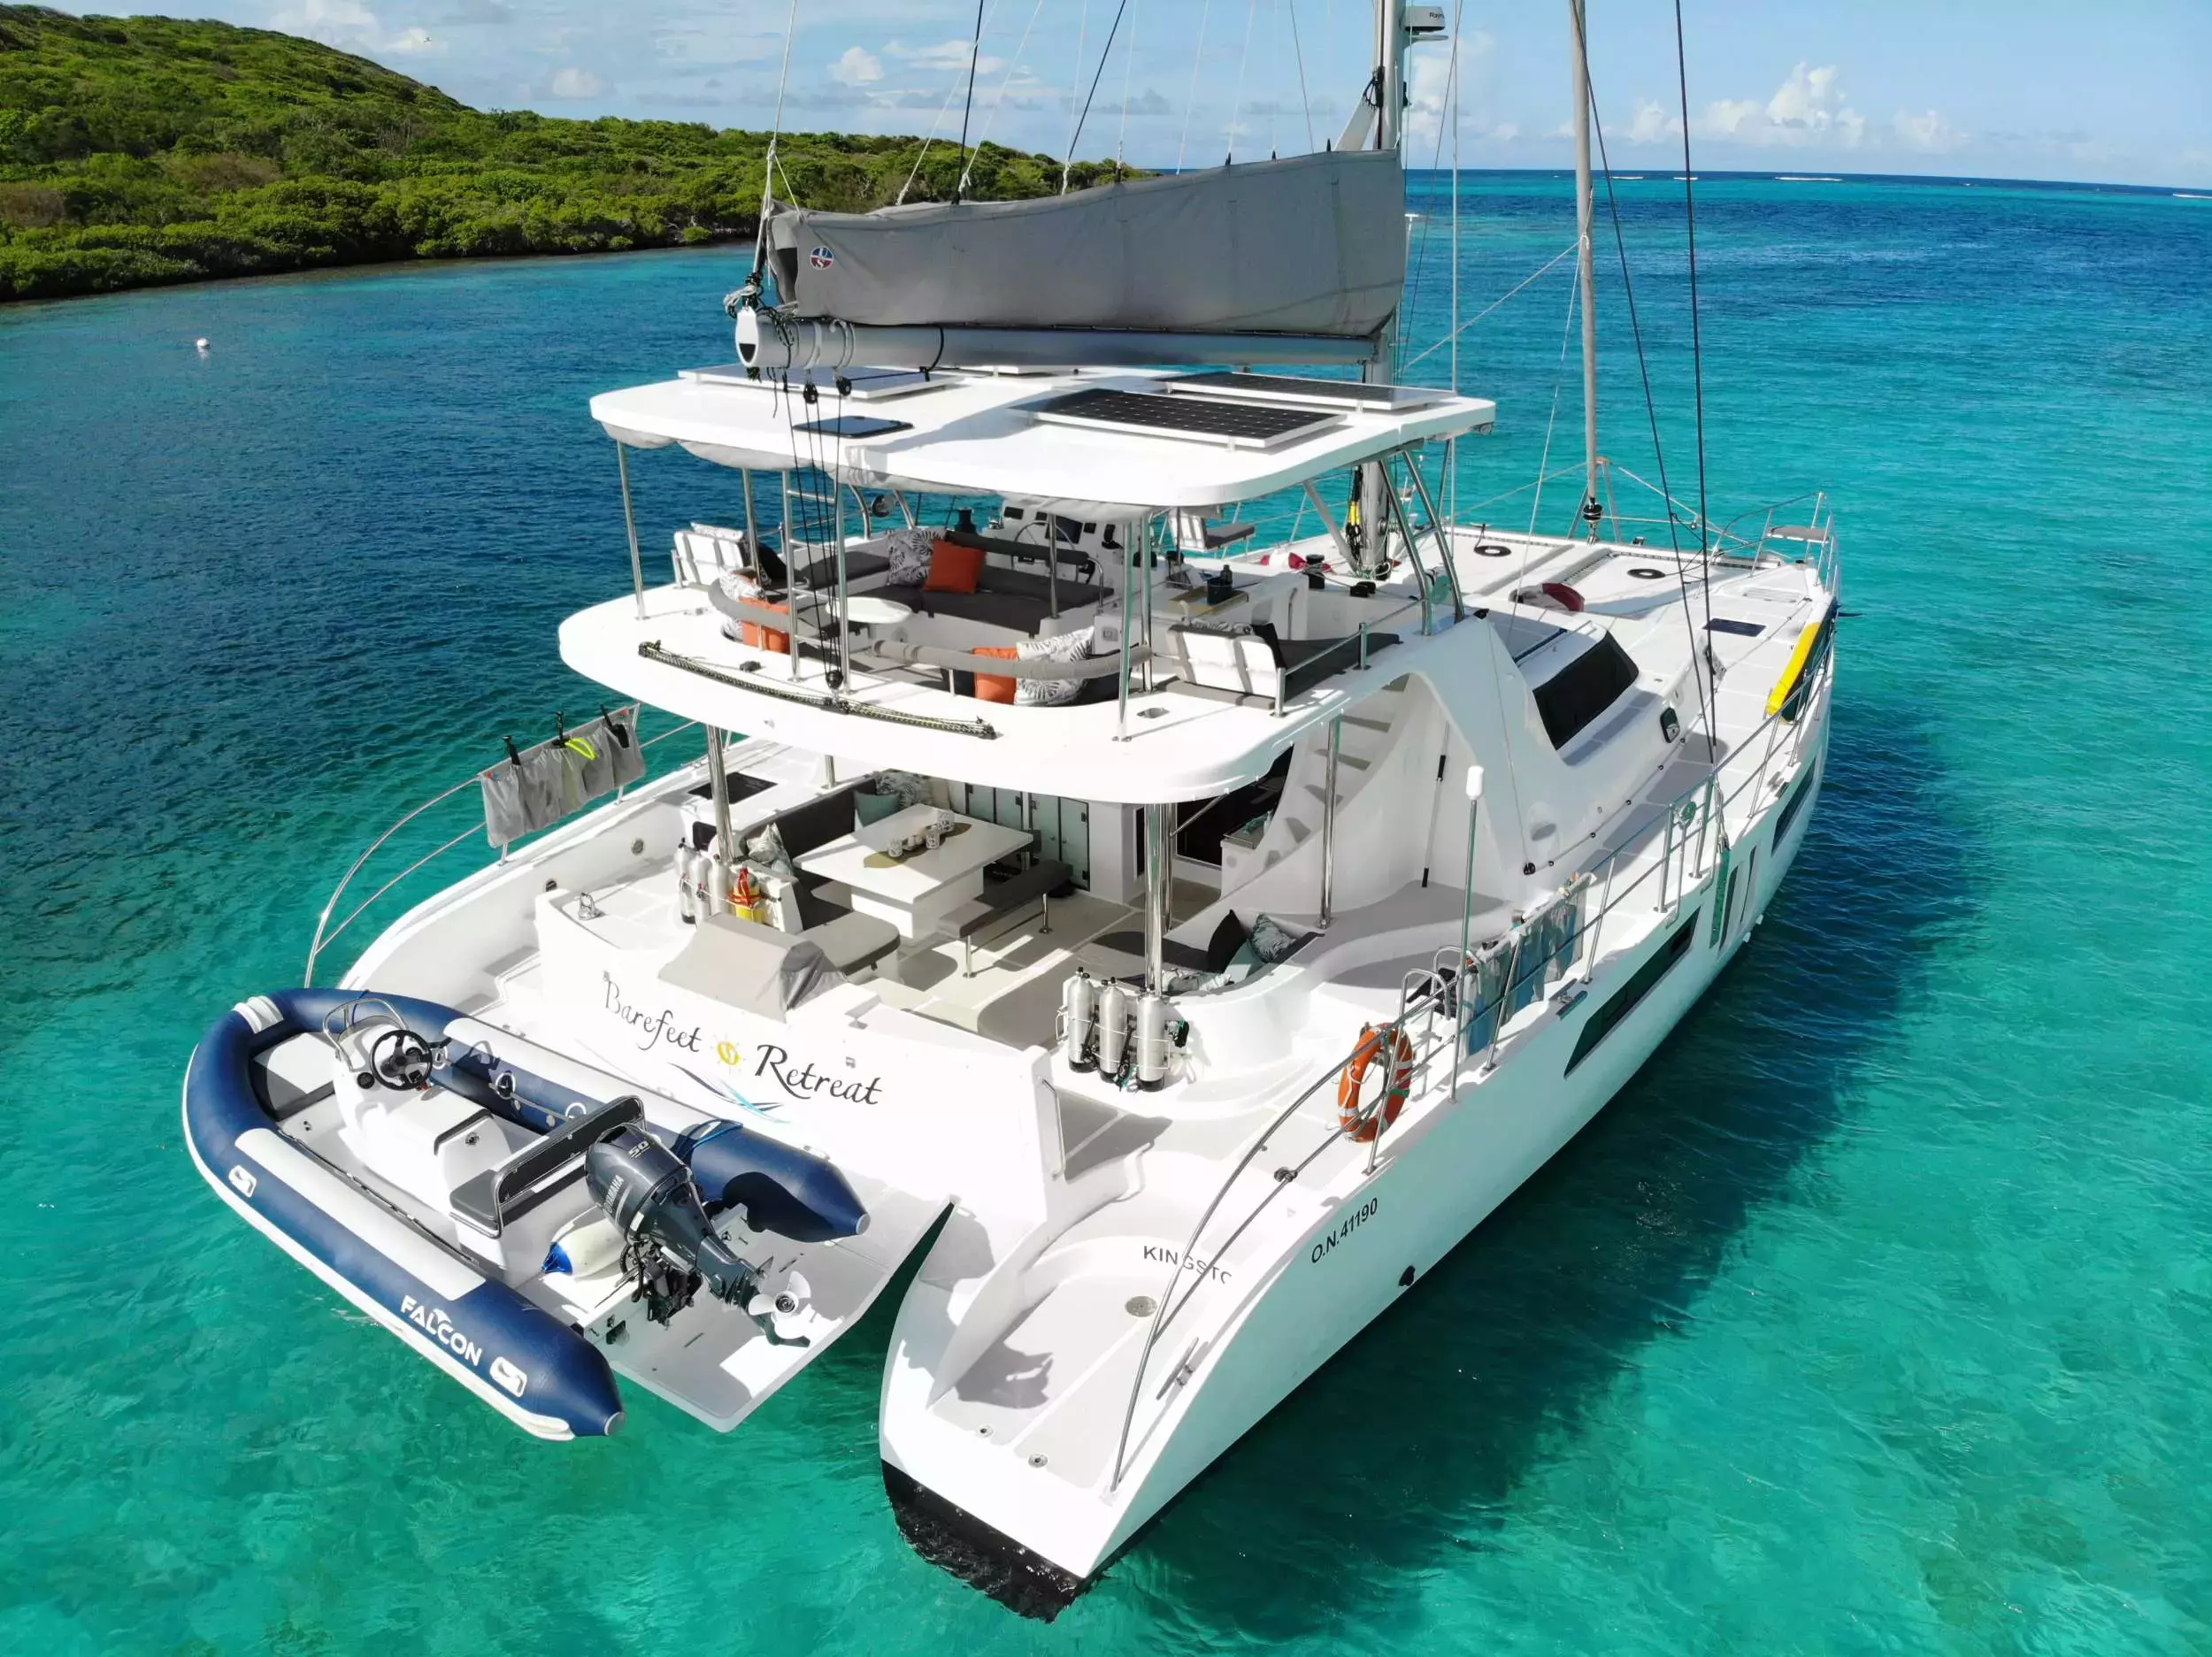 Barefeet Retreat by Royal Cape - Special Offer for a private Sailing Catamaran Charter in St John with a crew